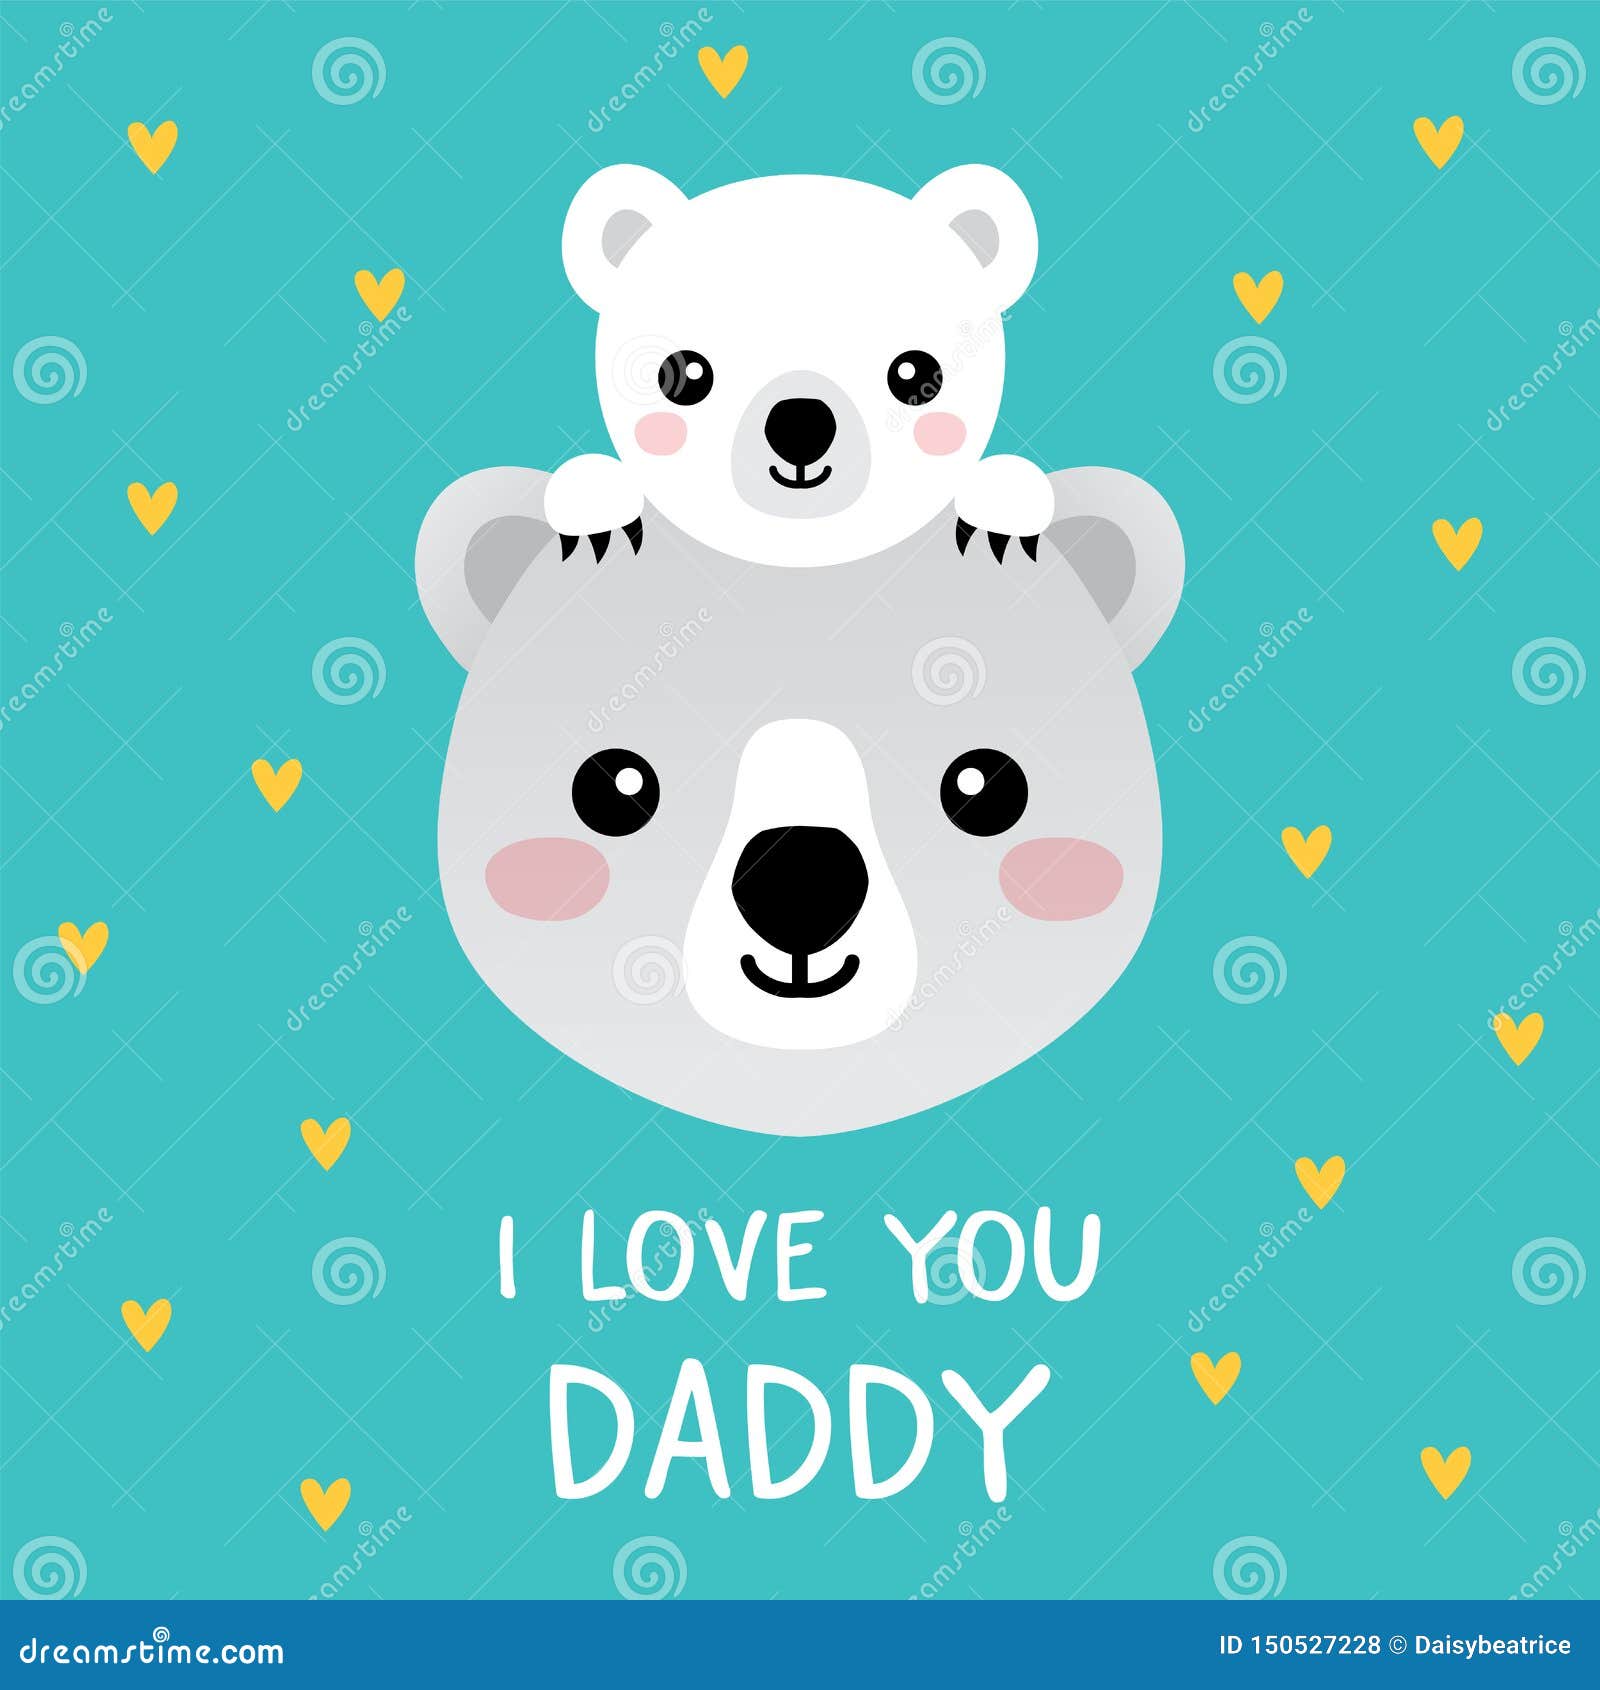 Cute Fathers Day Card With Polar Bears I Love You Daddy Stock Vector Illustration Of Design Bear